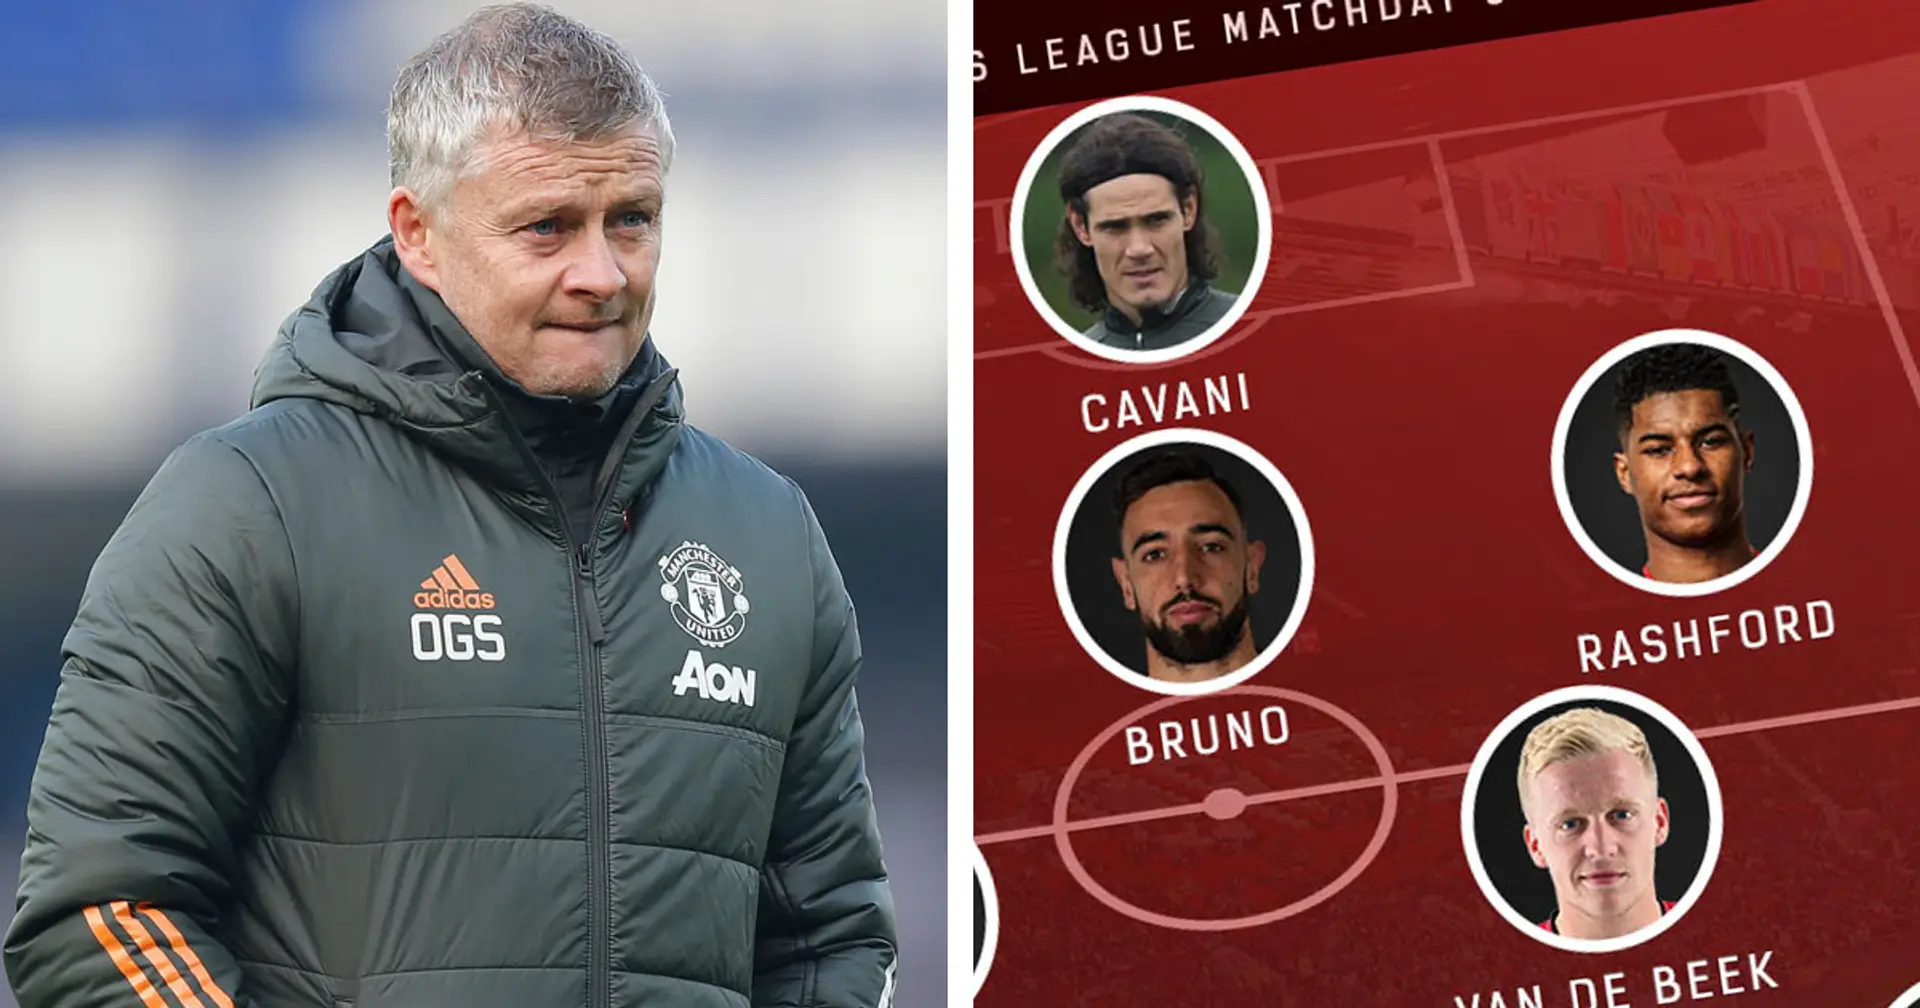 Cavani and Van de Beek to start? Select your favourite United XI vs PSG from 3 options